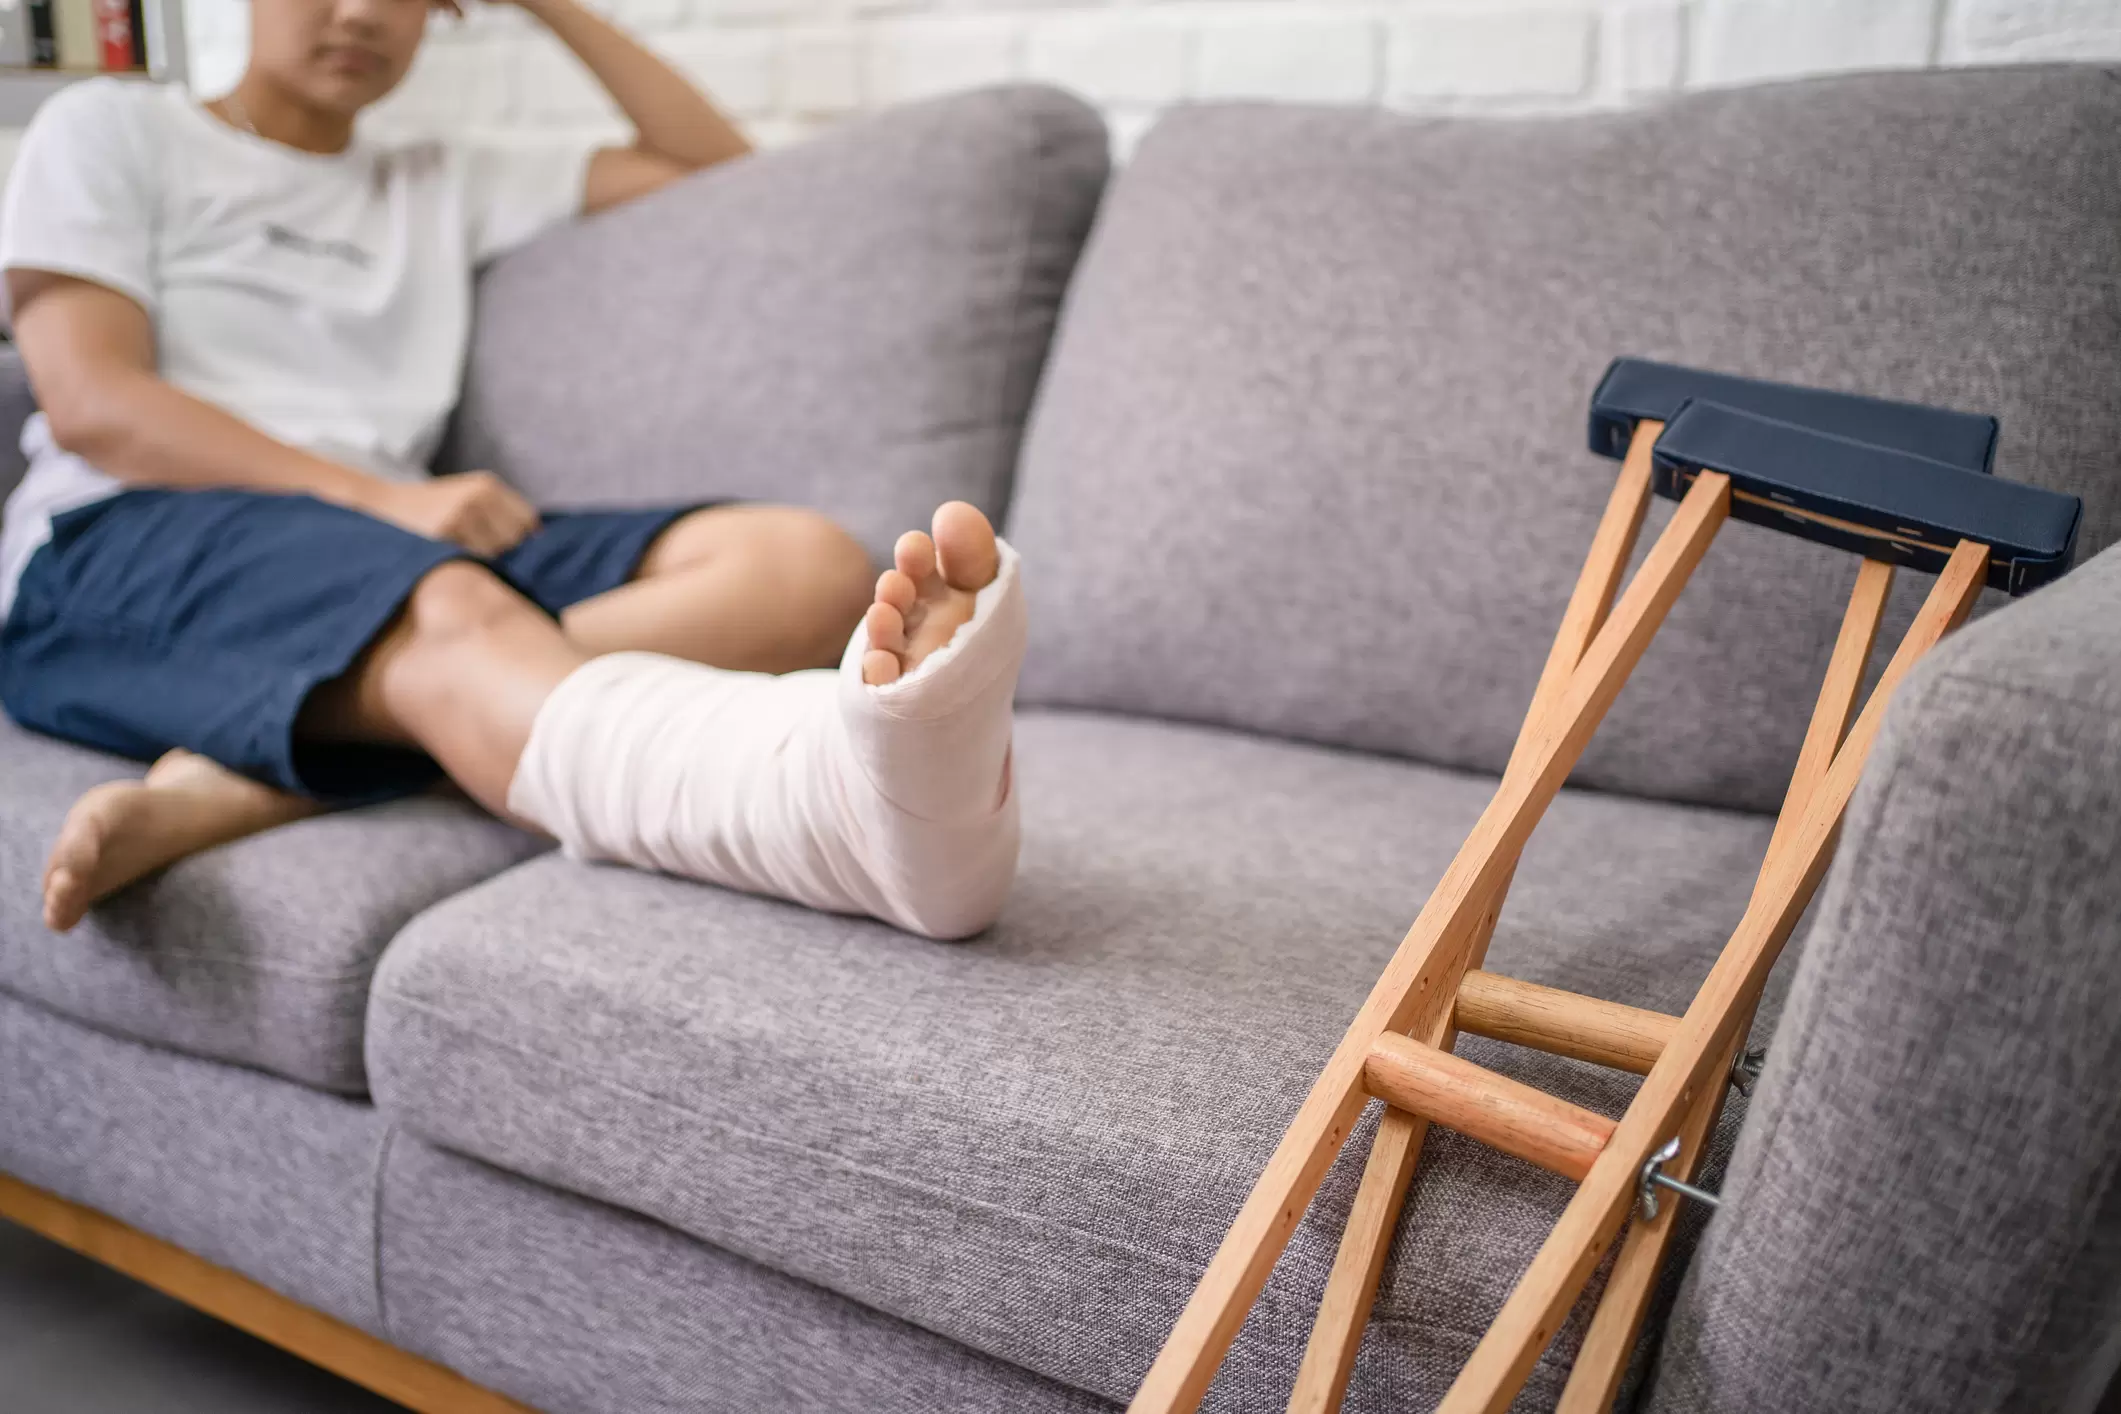 Do I have to use sick time for workers compensation?